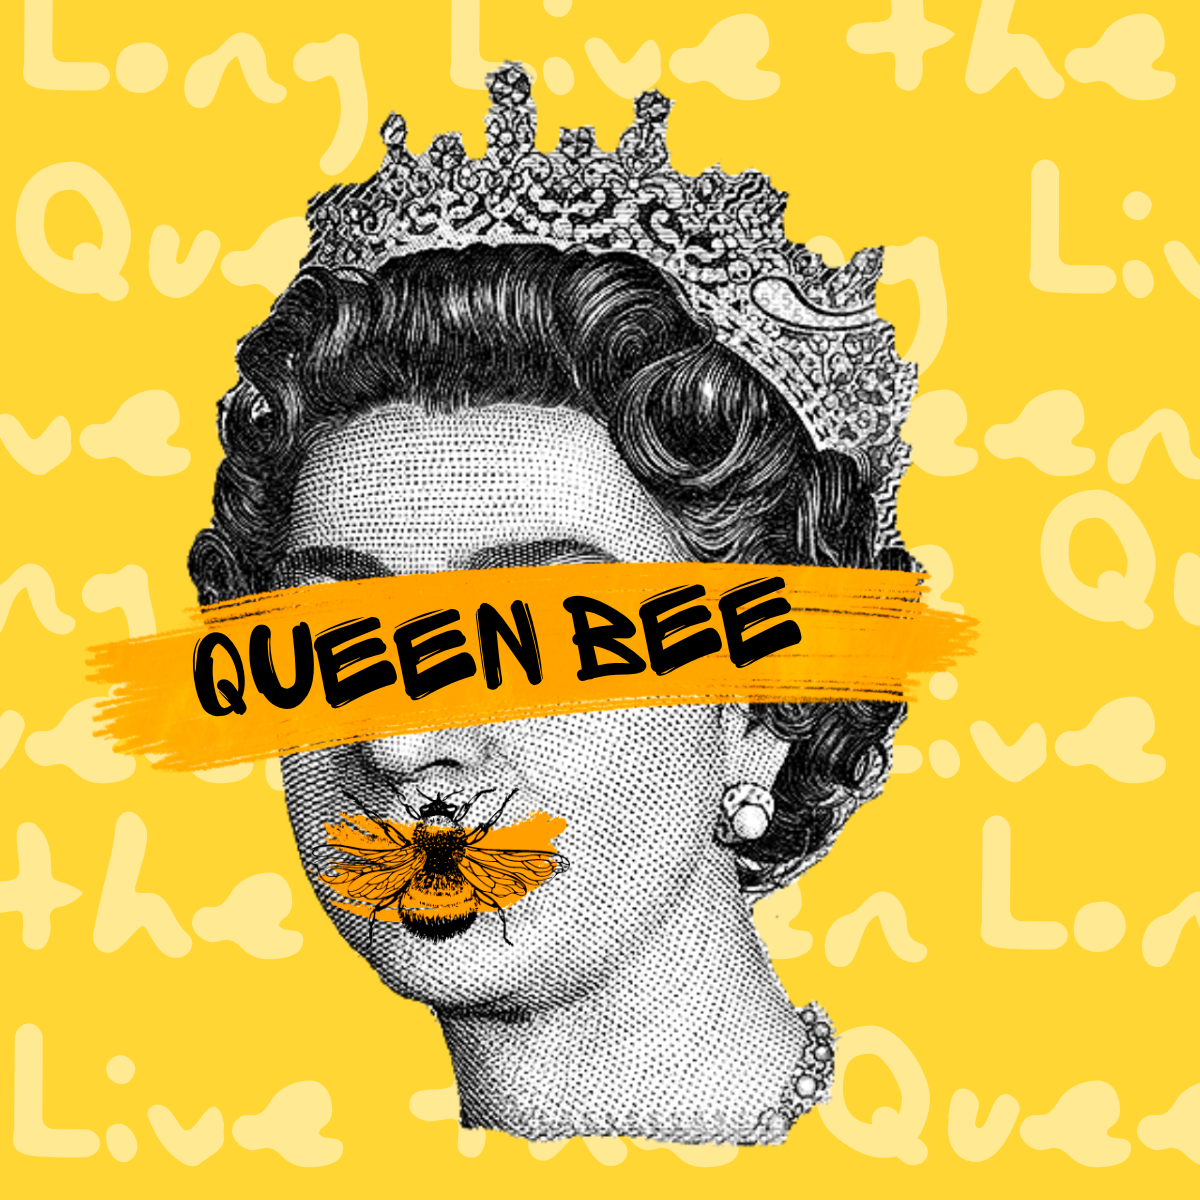 S5.17 Genetics of Society: How to be a queen bee